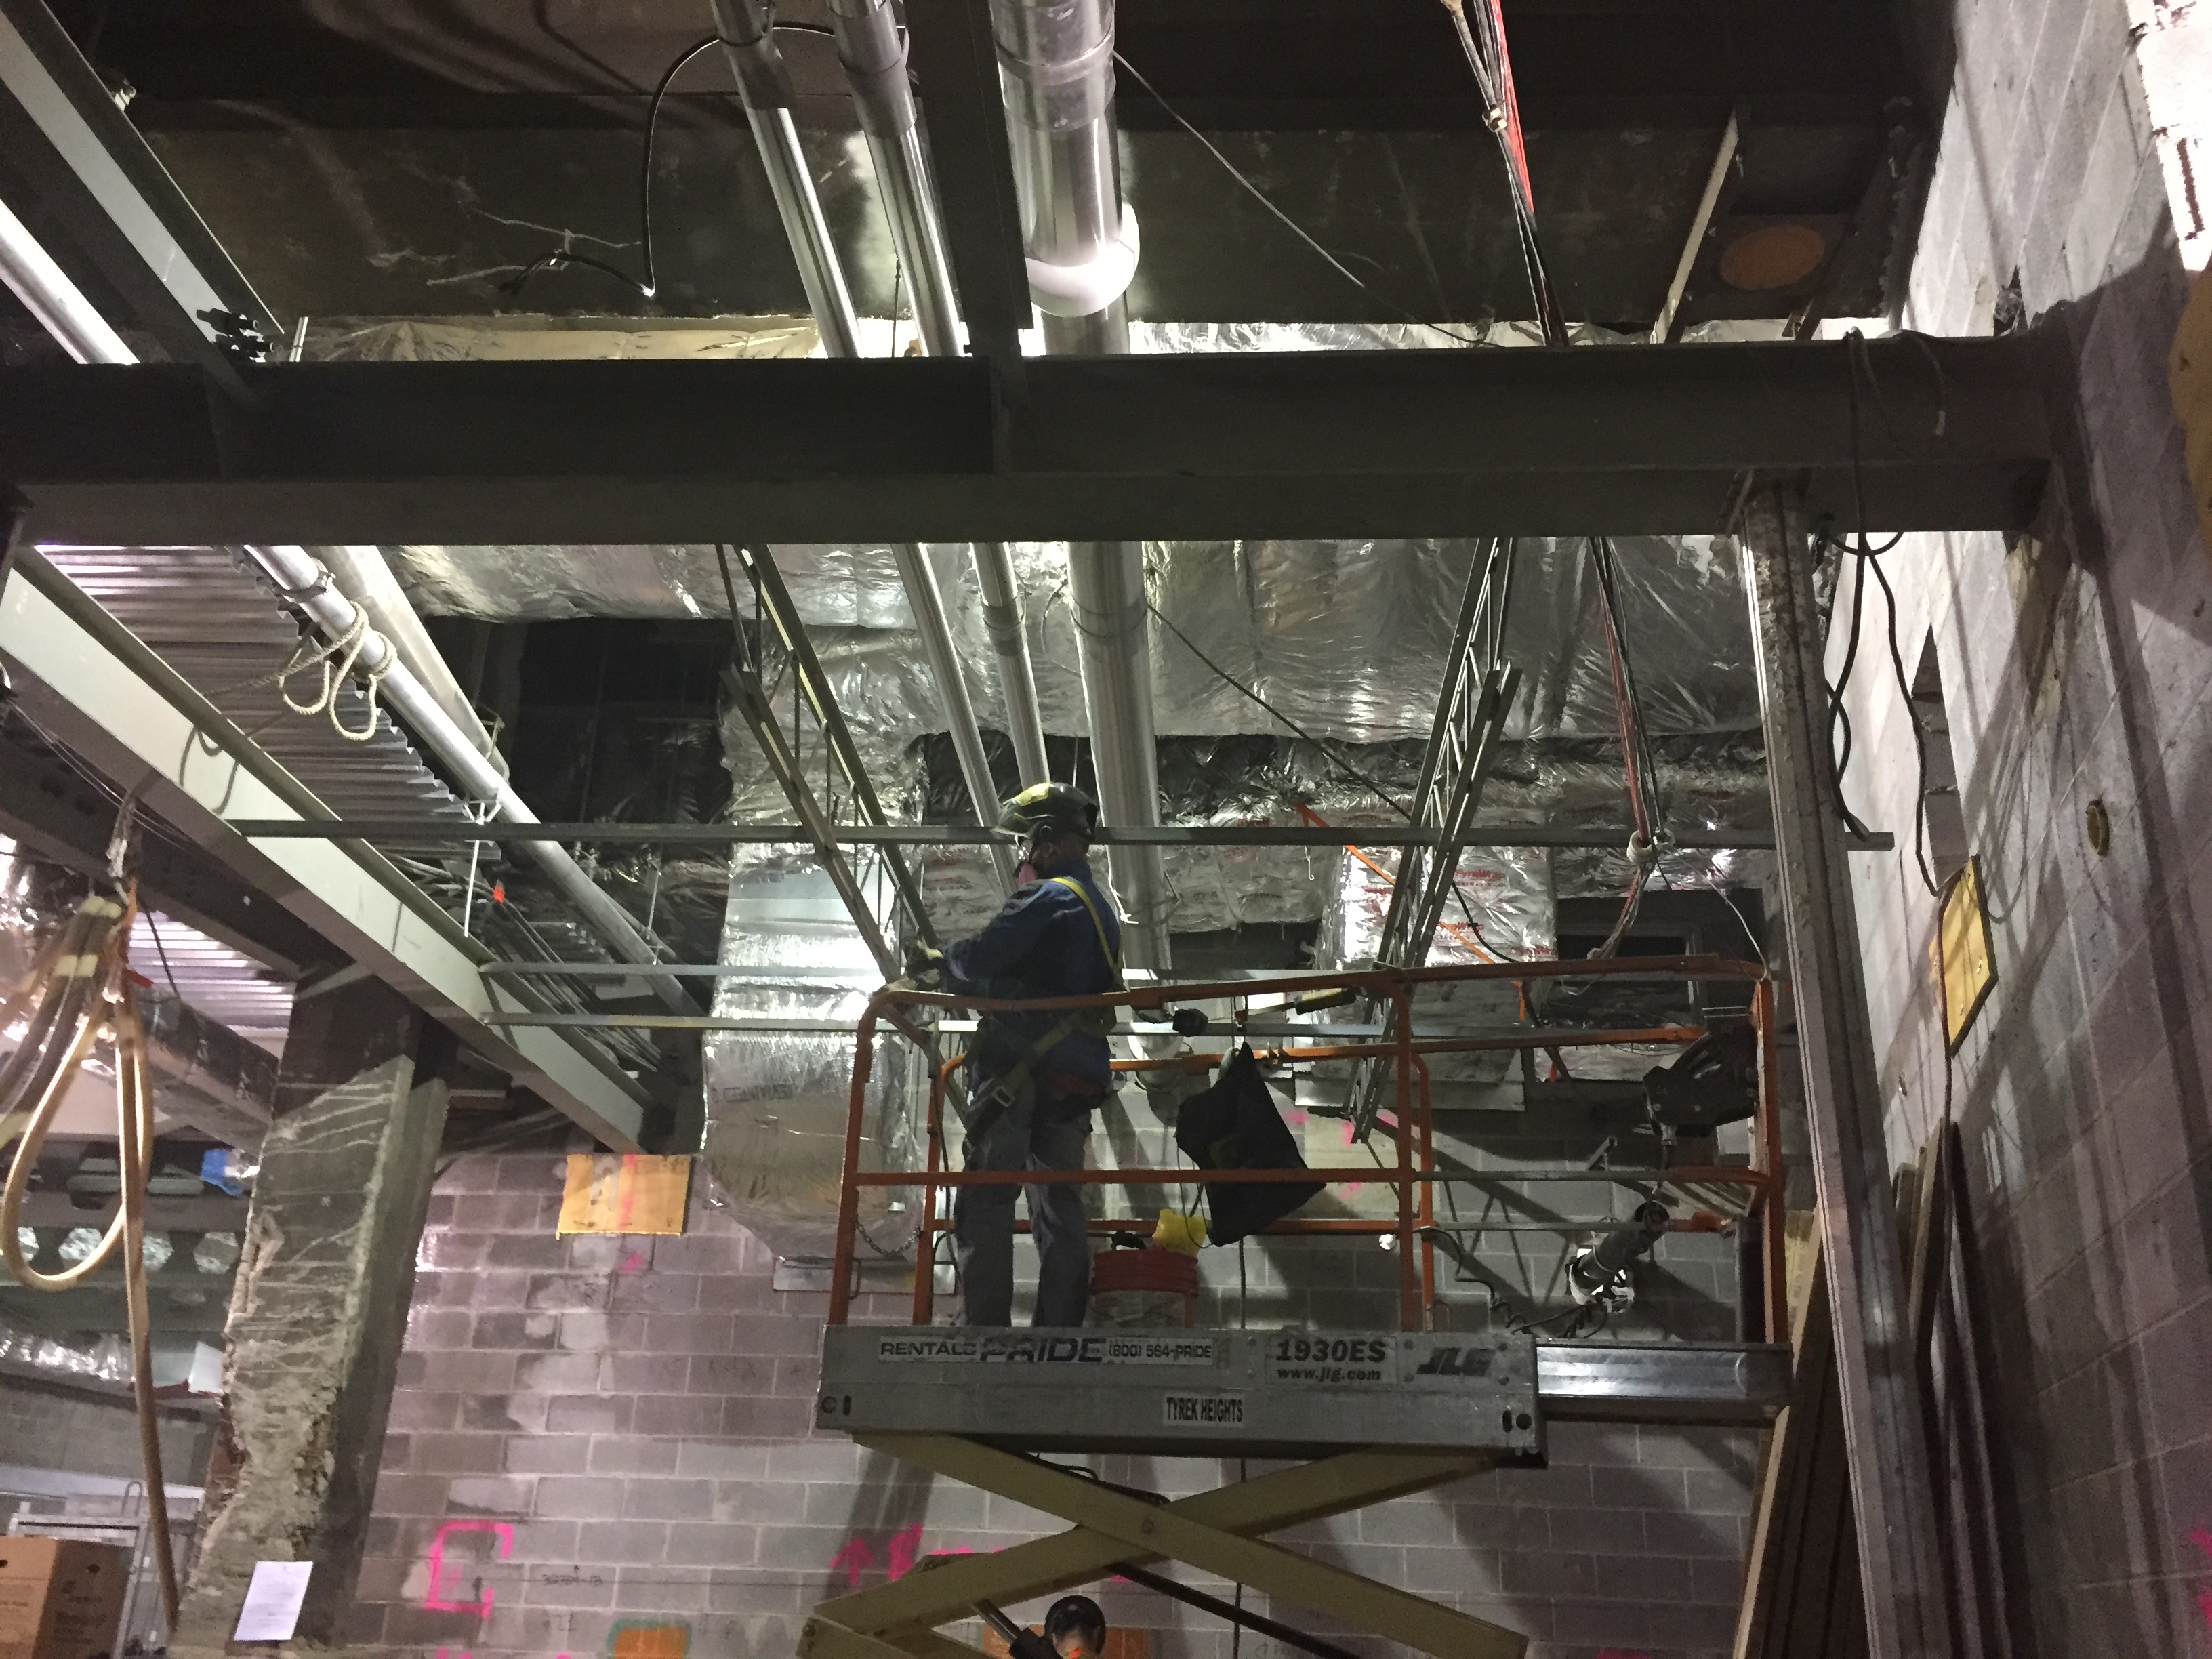 Ceiling support installed in a retail area of the future LIRR passenger concourse. (CM014B, 01-03-2019) (31660458667)